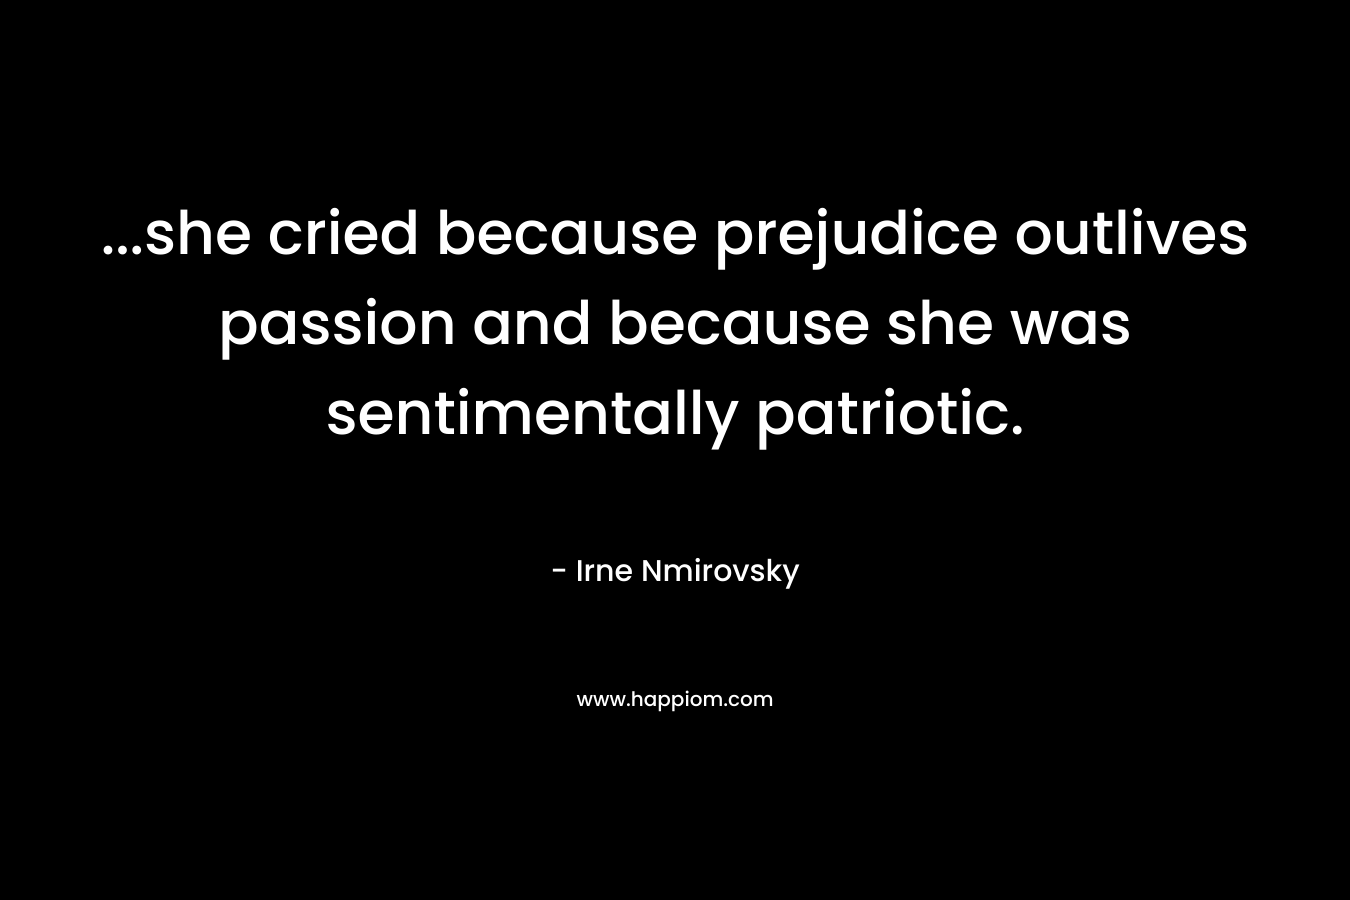 …she cried because prejudice outlives passion and because she was sentimentally patriotic. – Irne Nmirovsky